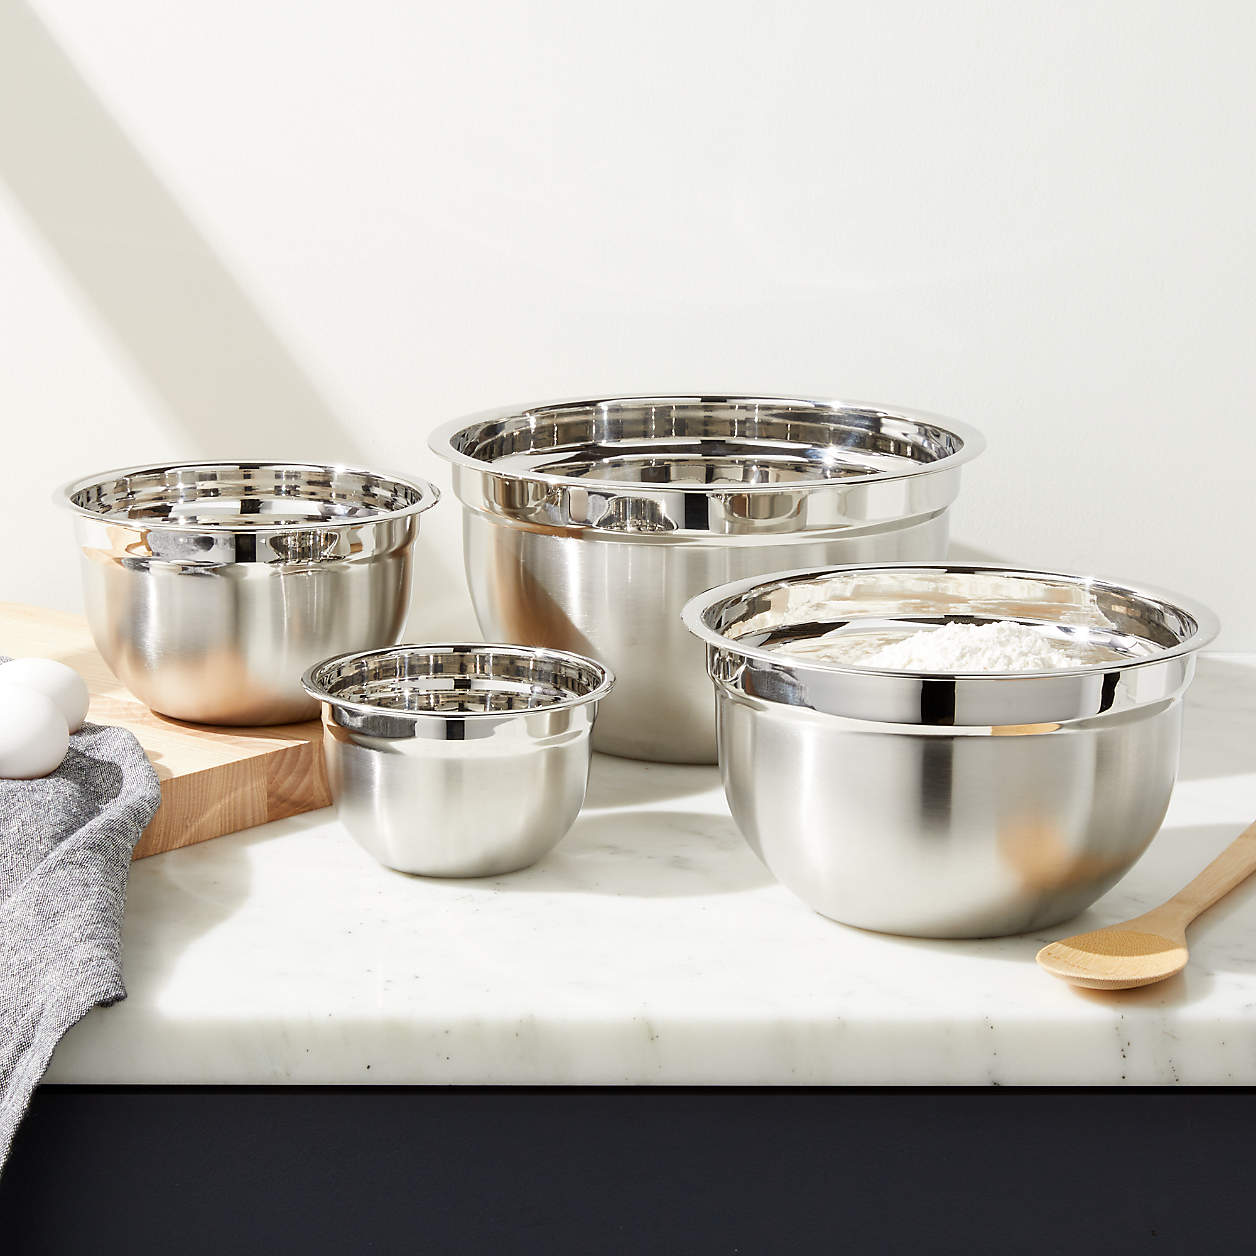 Crate & Barrel 4-Piece Stainless Steel Bowls